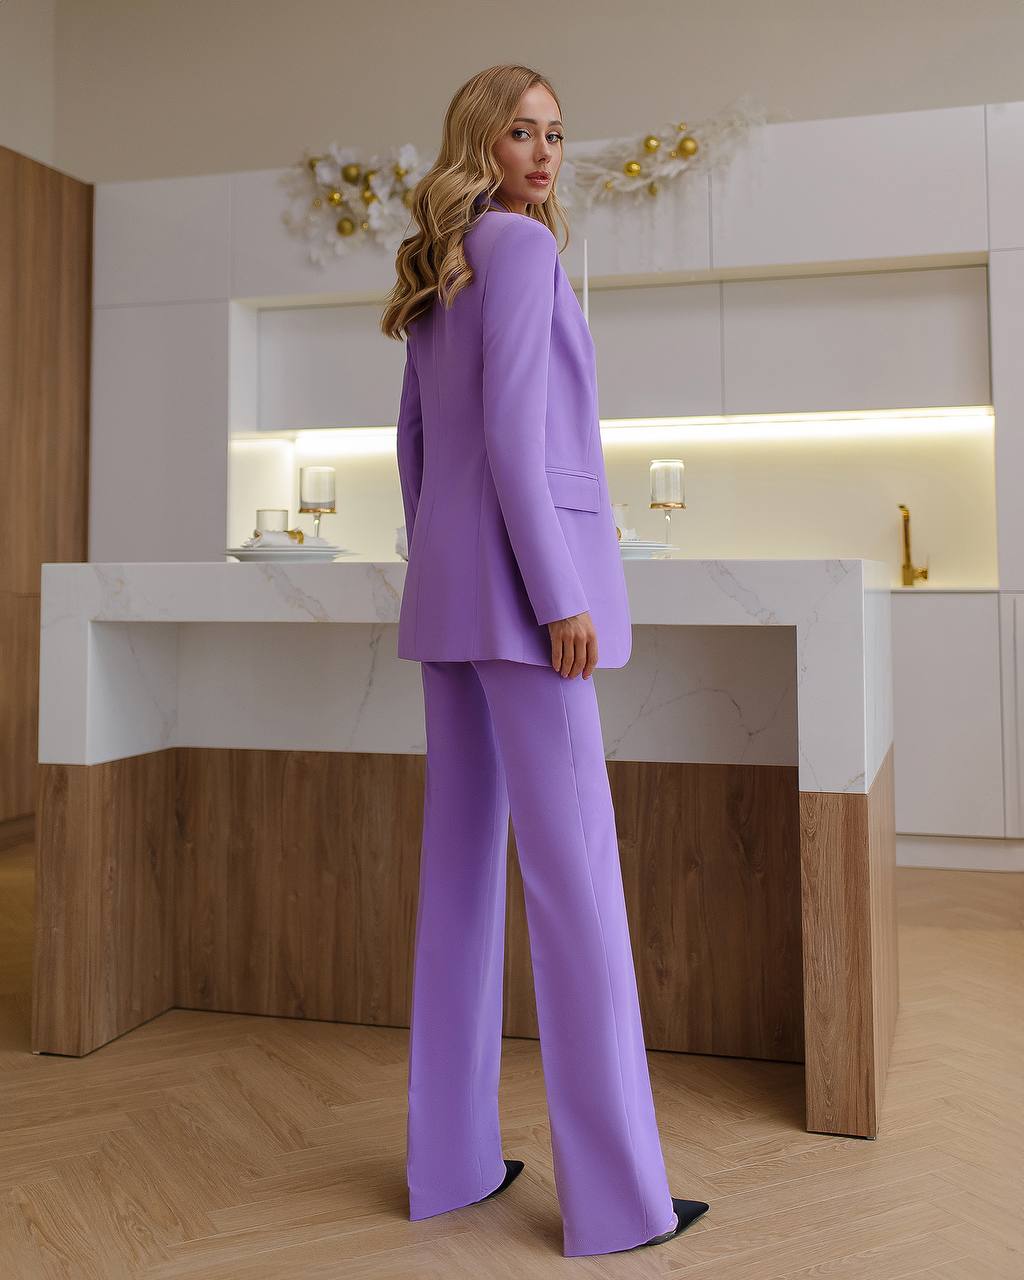 a woman in a purple suit standing in front of a counter